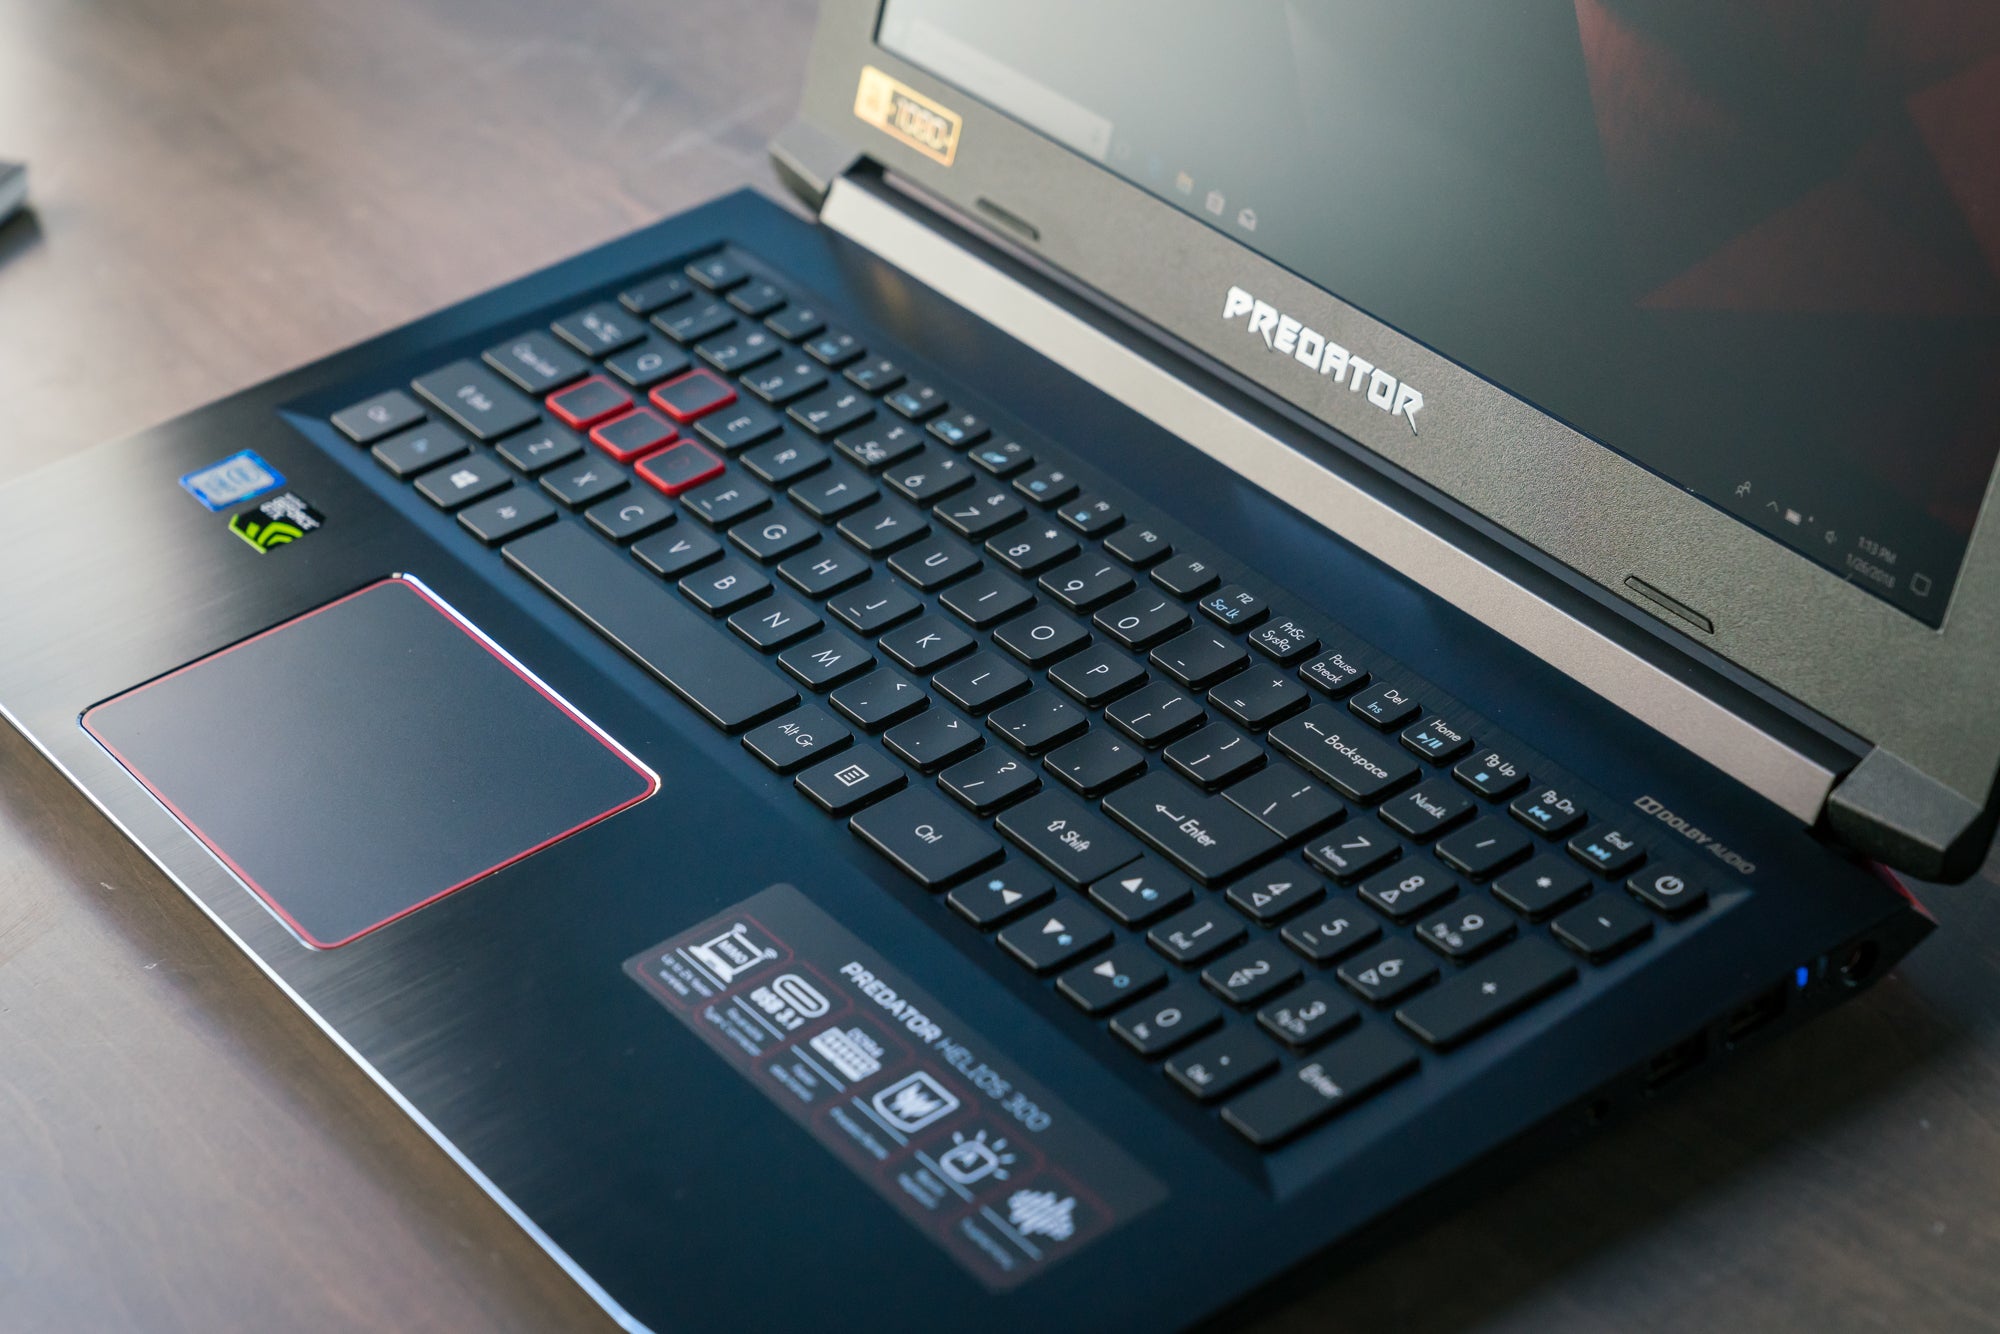 Acer Predator Helios 300 review: A well-rounded gaming laptop at a